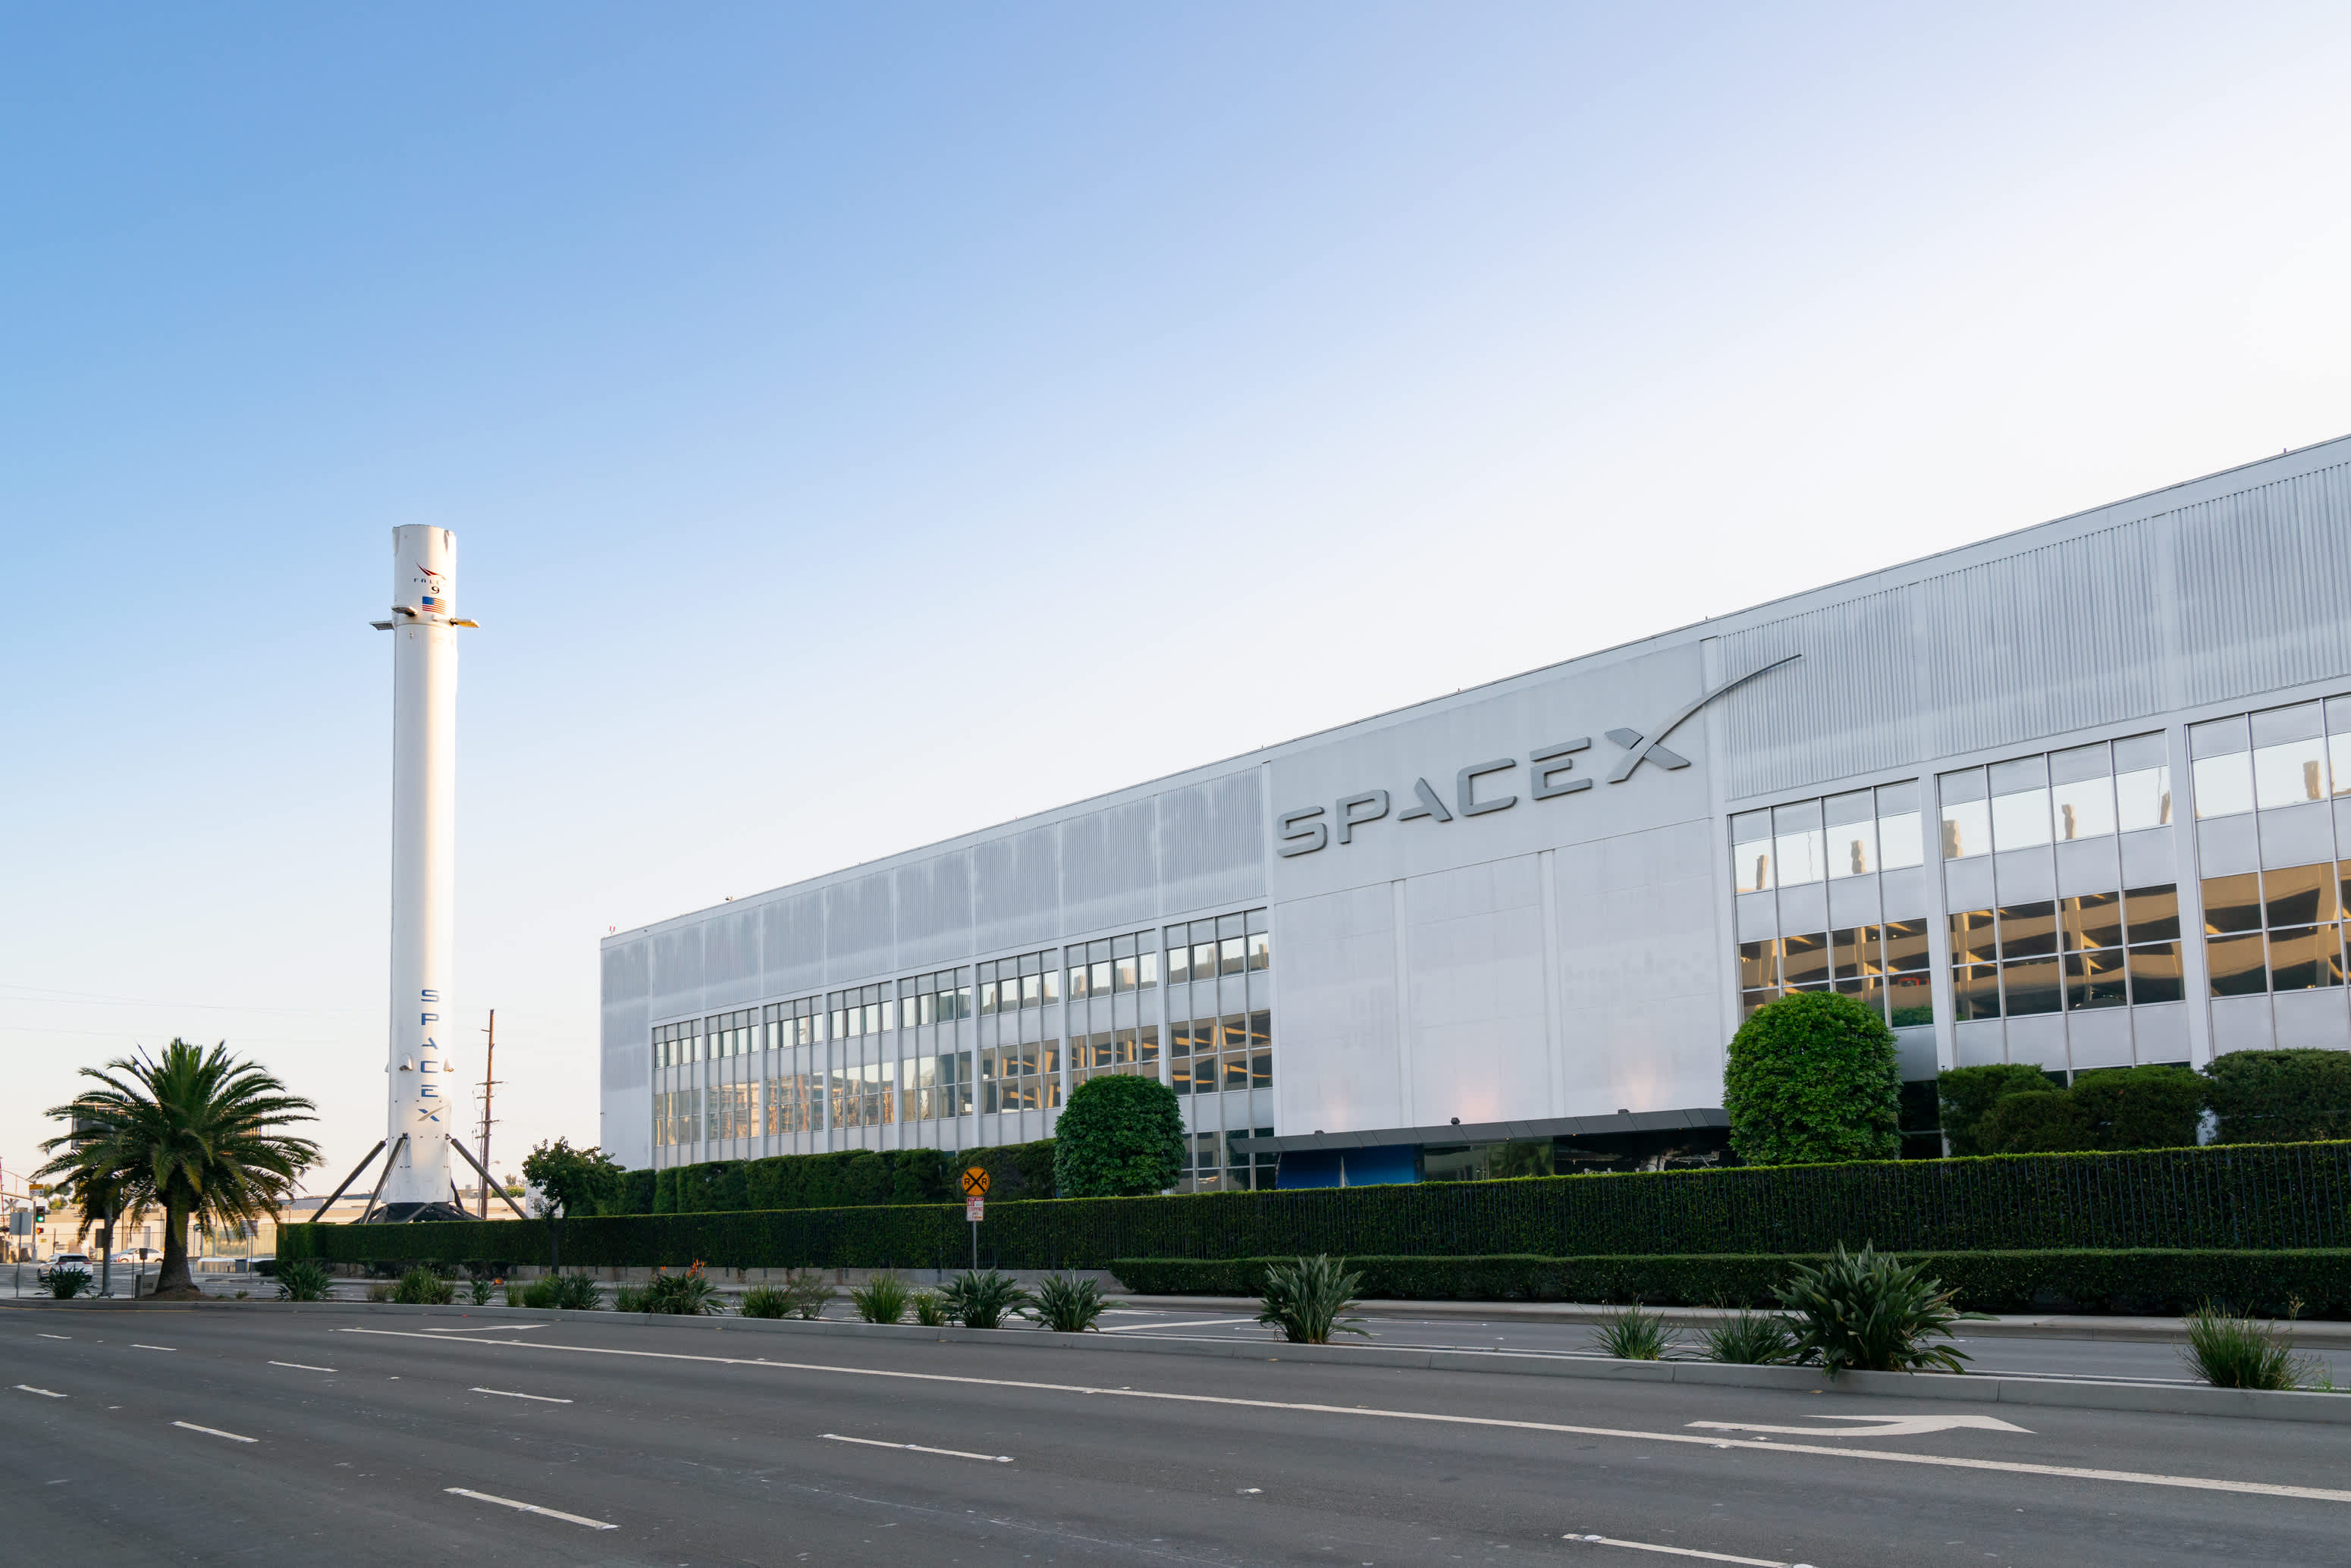 The DOJ is investigating SpaceX after filing a discrimination complaint